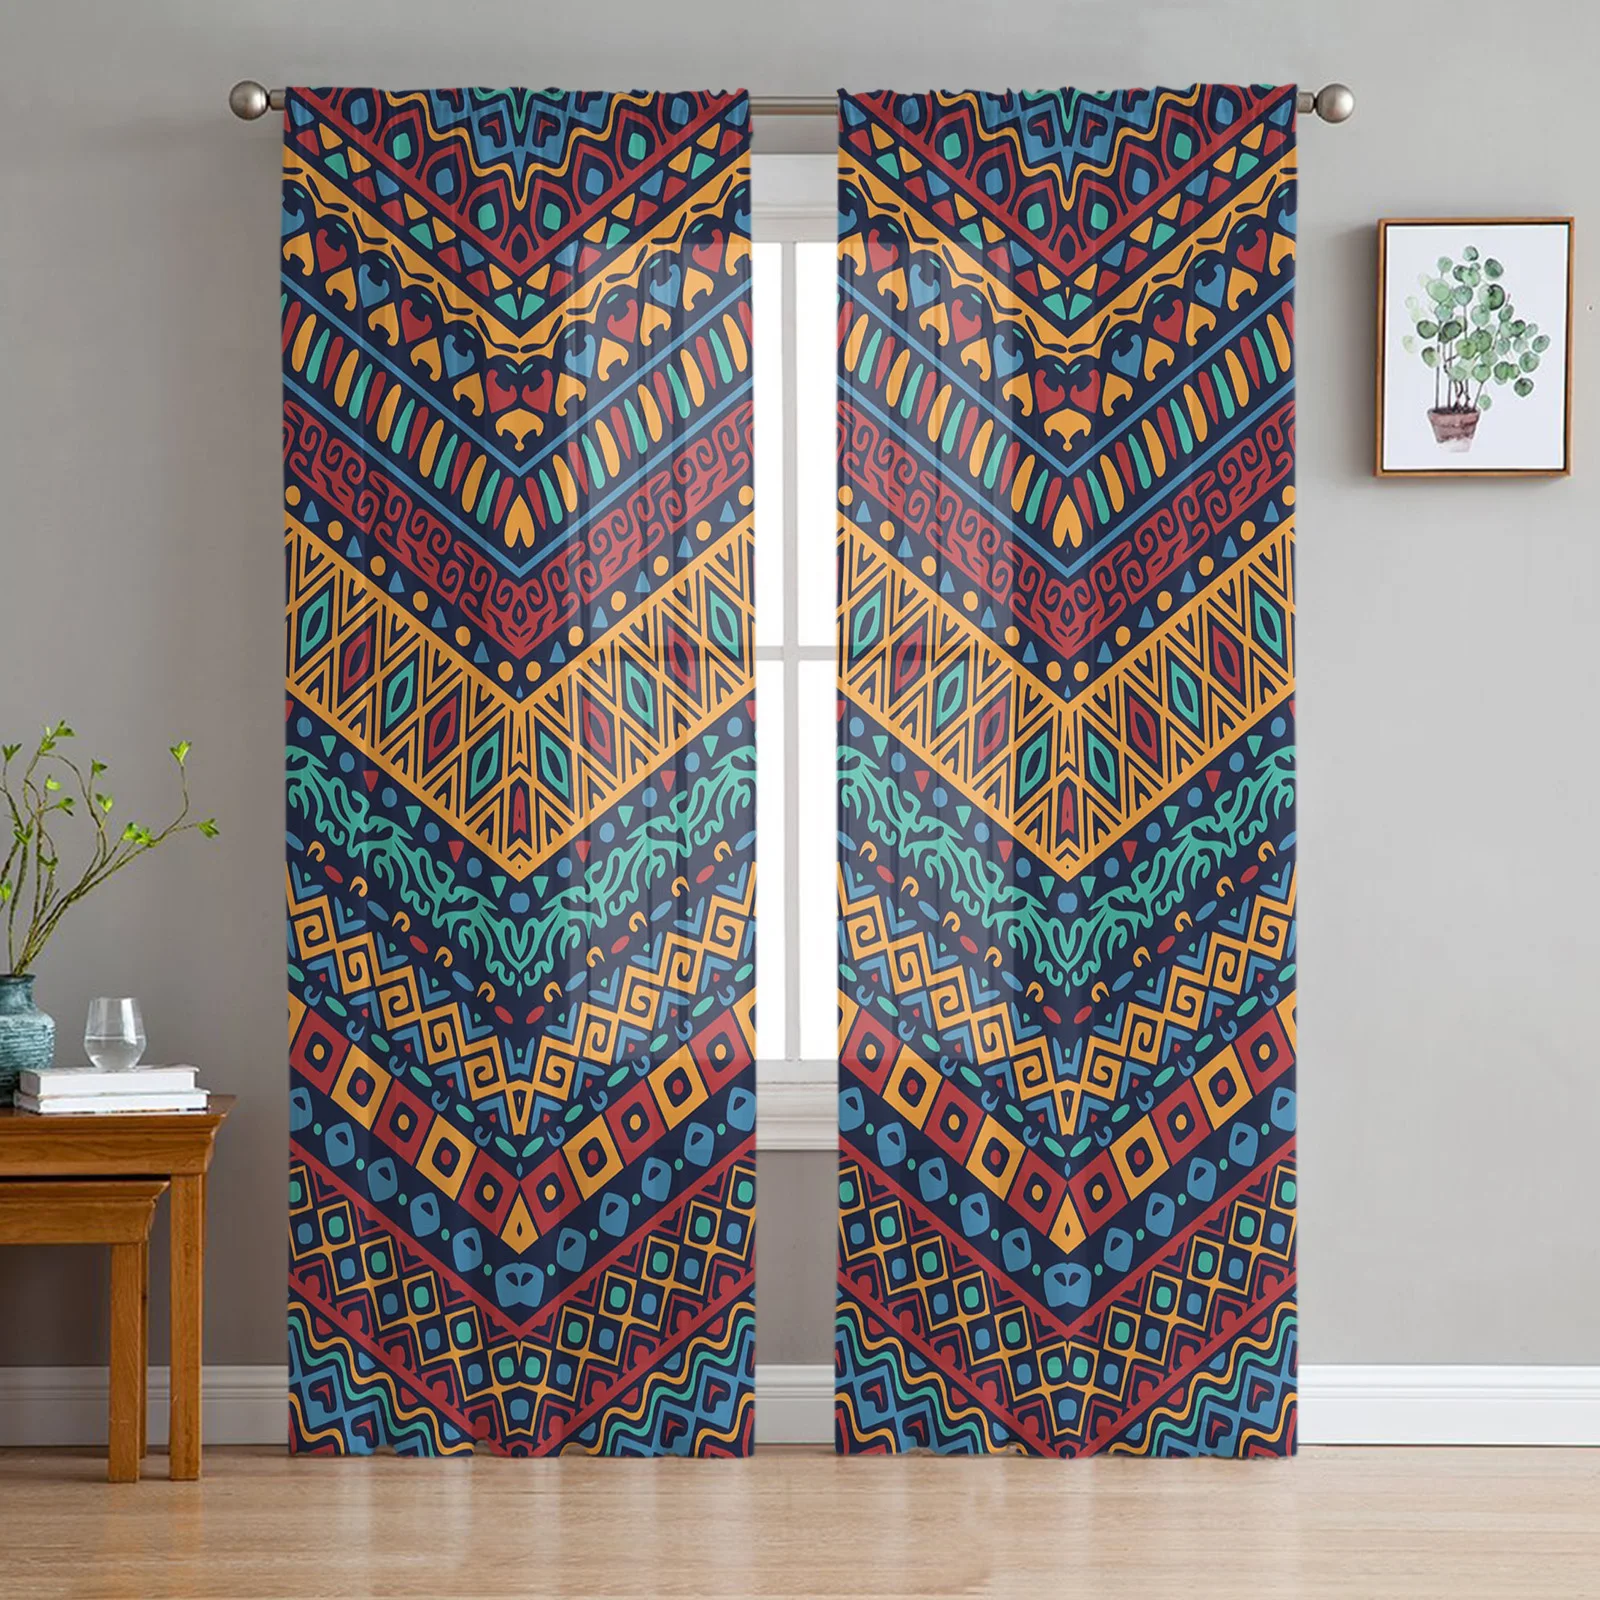 

Africa Colorful Geometric Art Chiffon Sheer Curtains for Living Room Bedroom Home Decoration Window Voiles Tulle Curtain